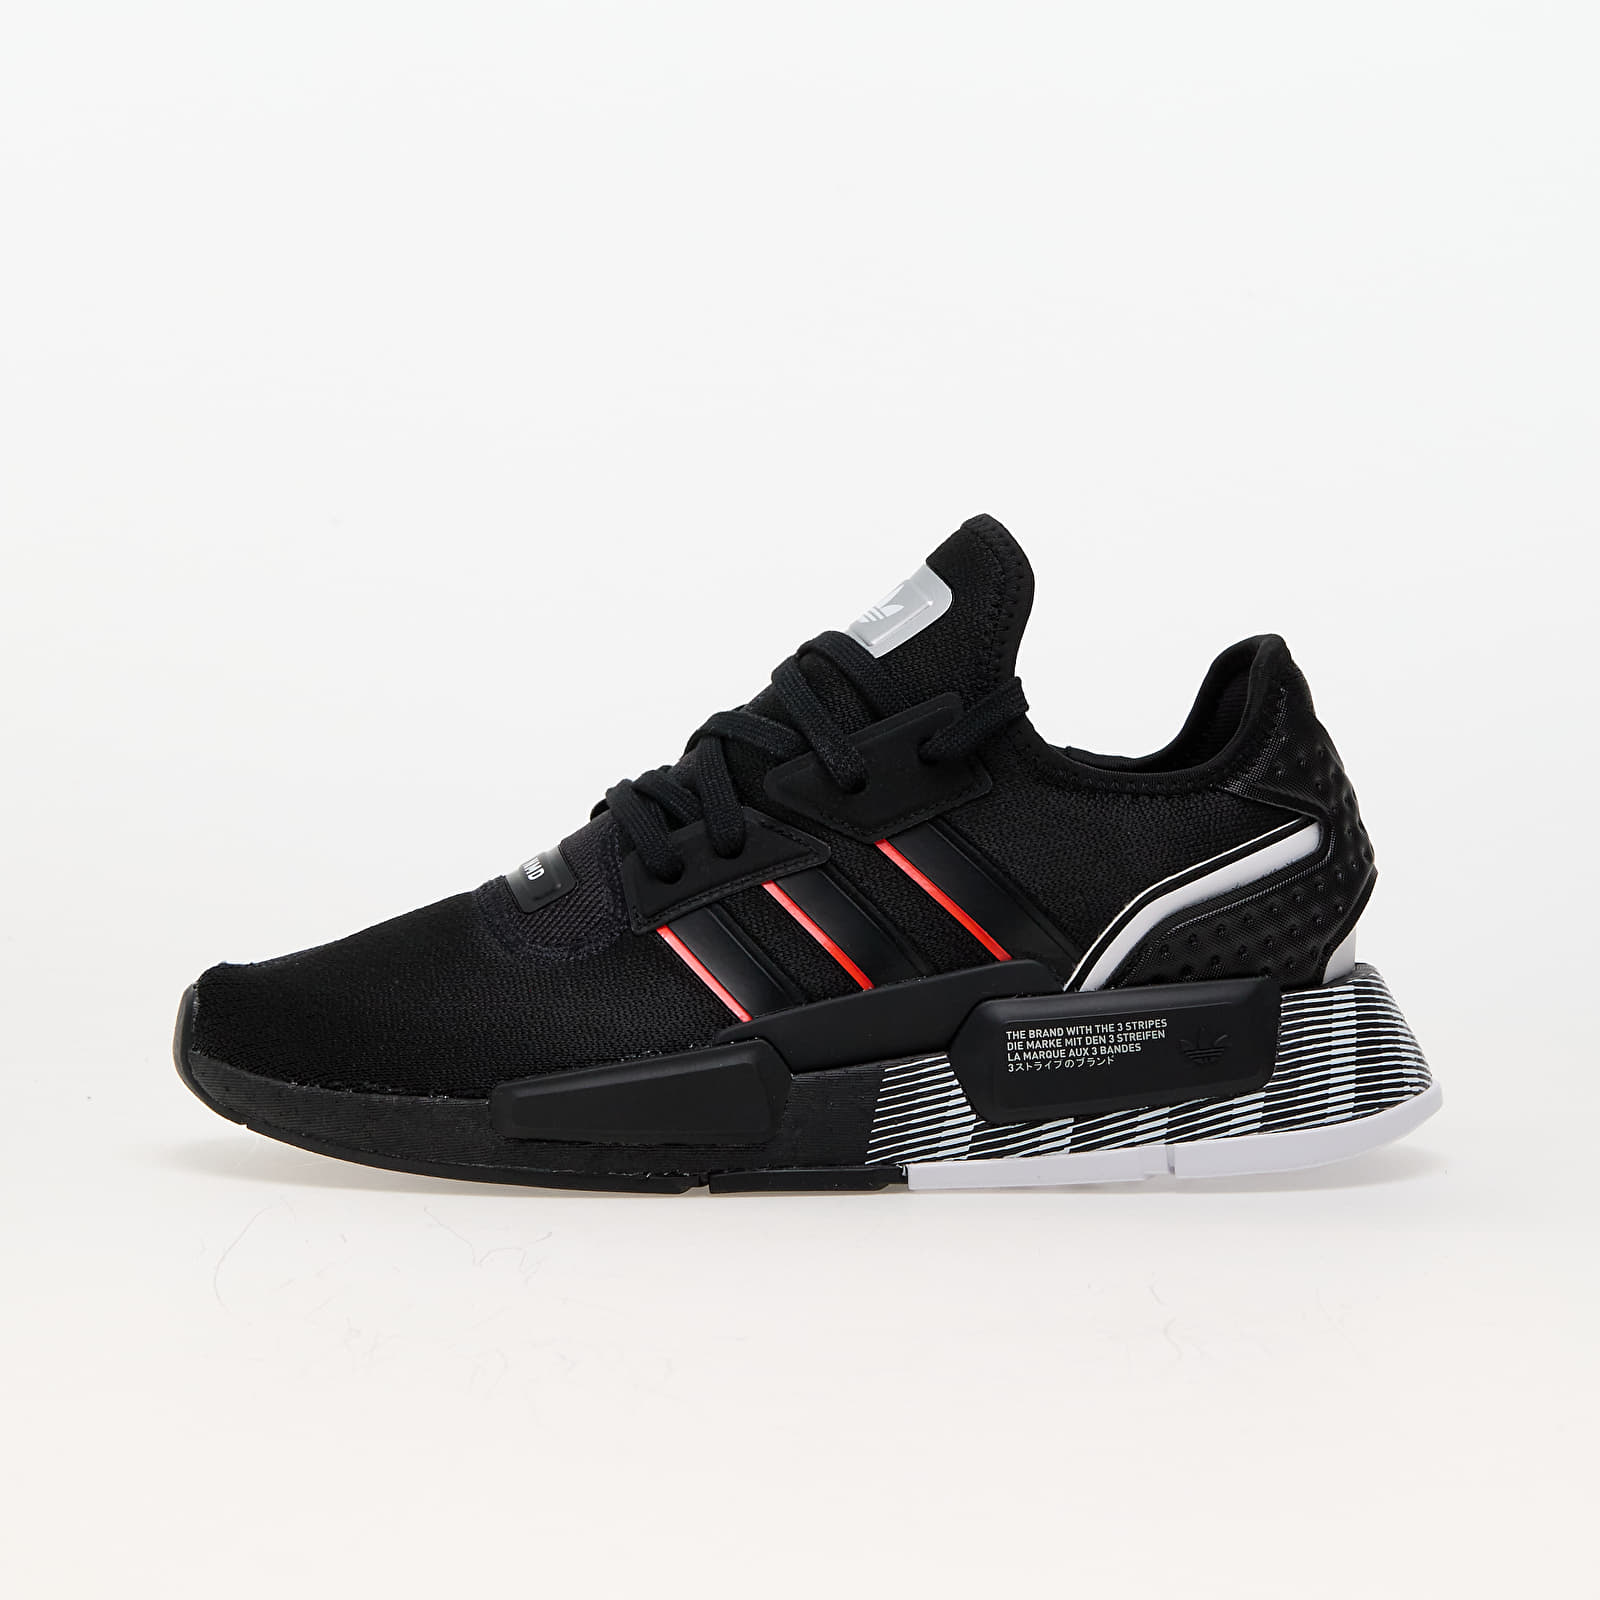 Baskets et chaussures pour hommes adidas Nmd_G1 Core Black/ Core Black/ Solid Red